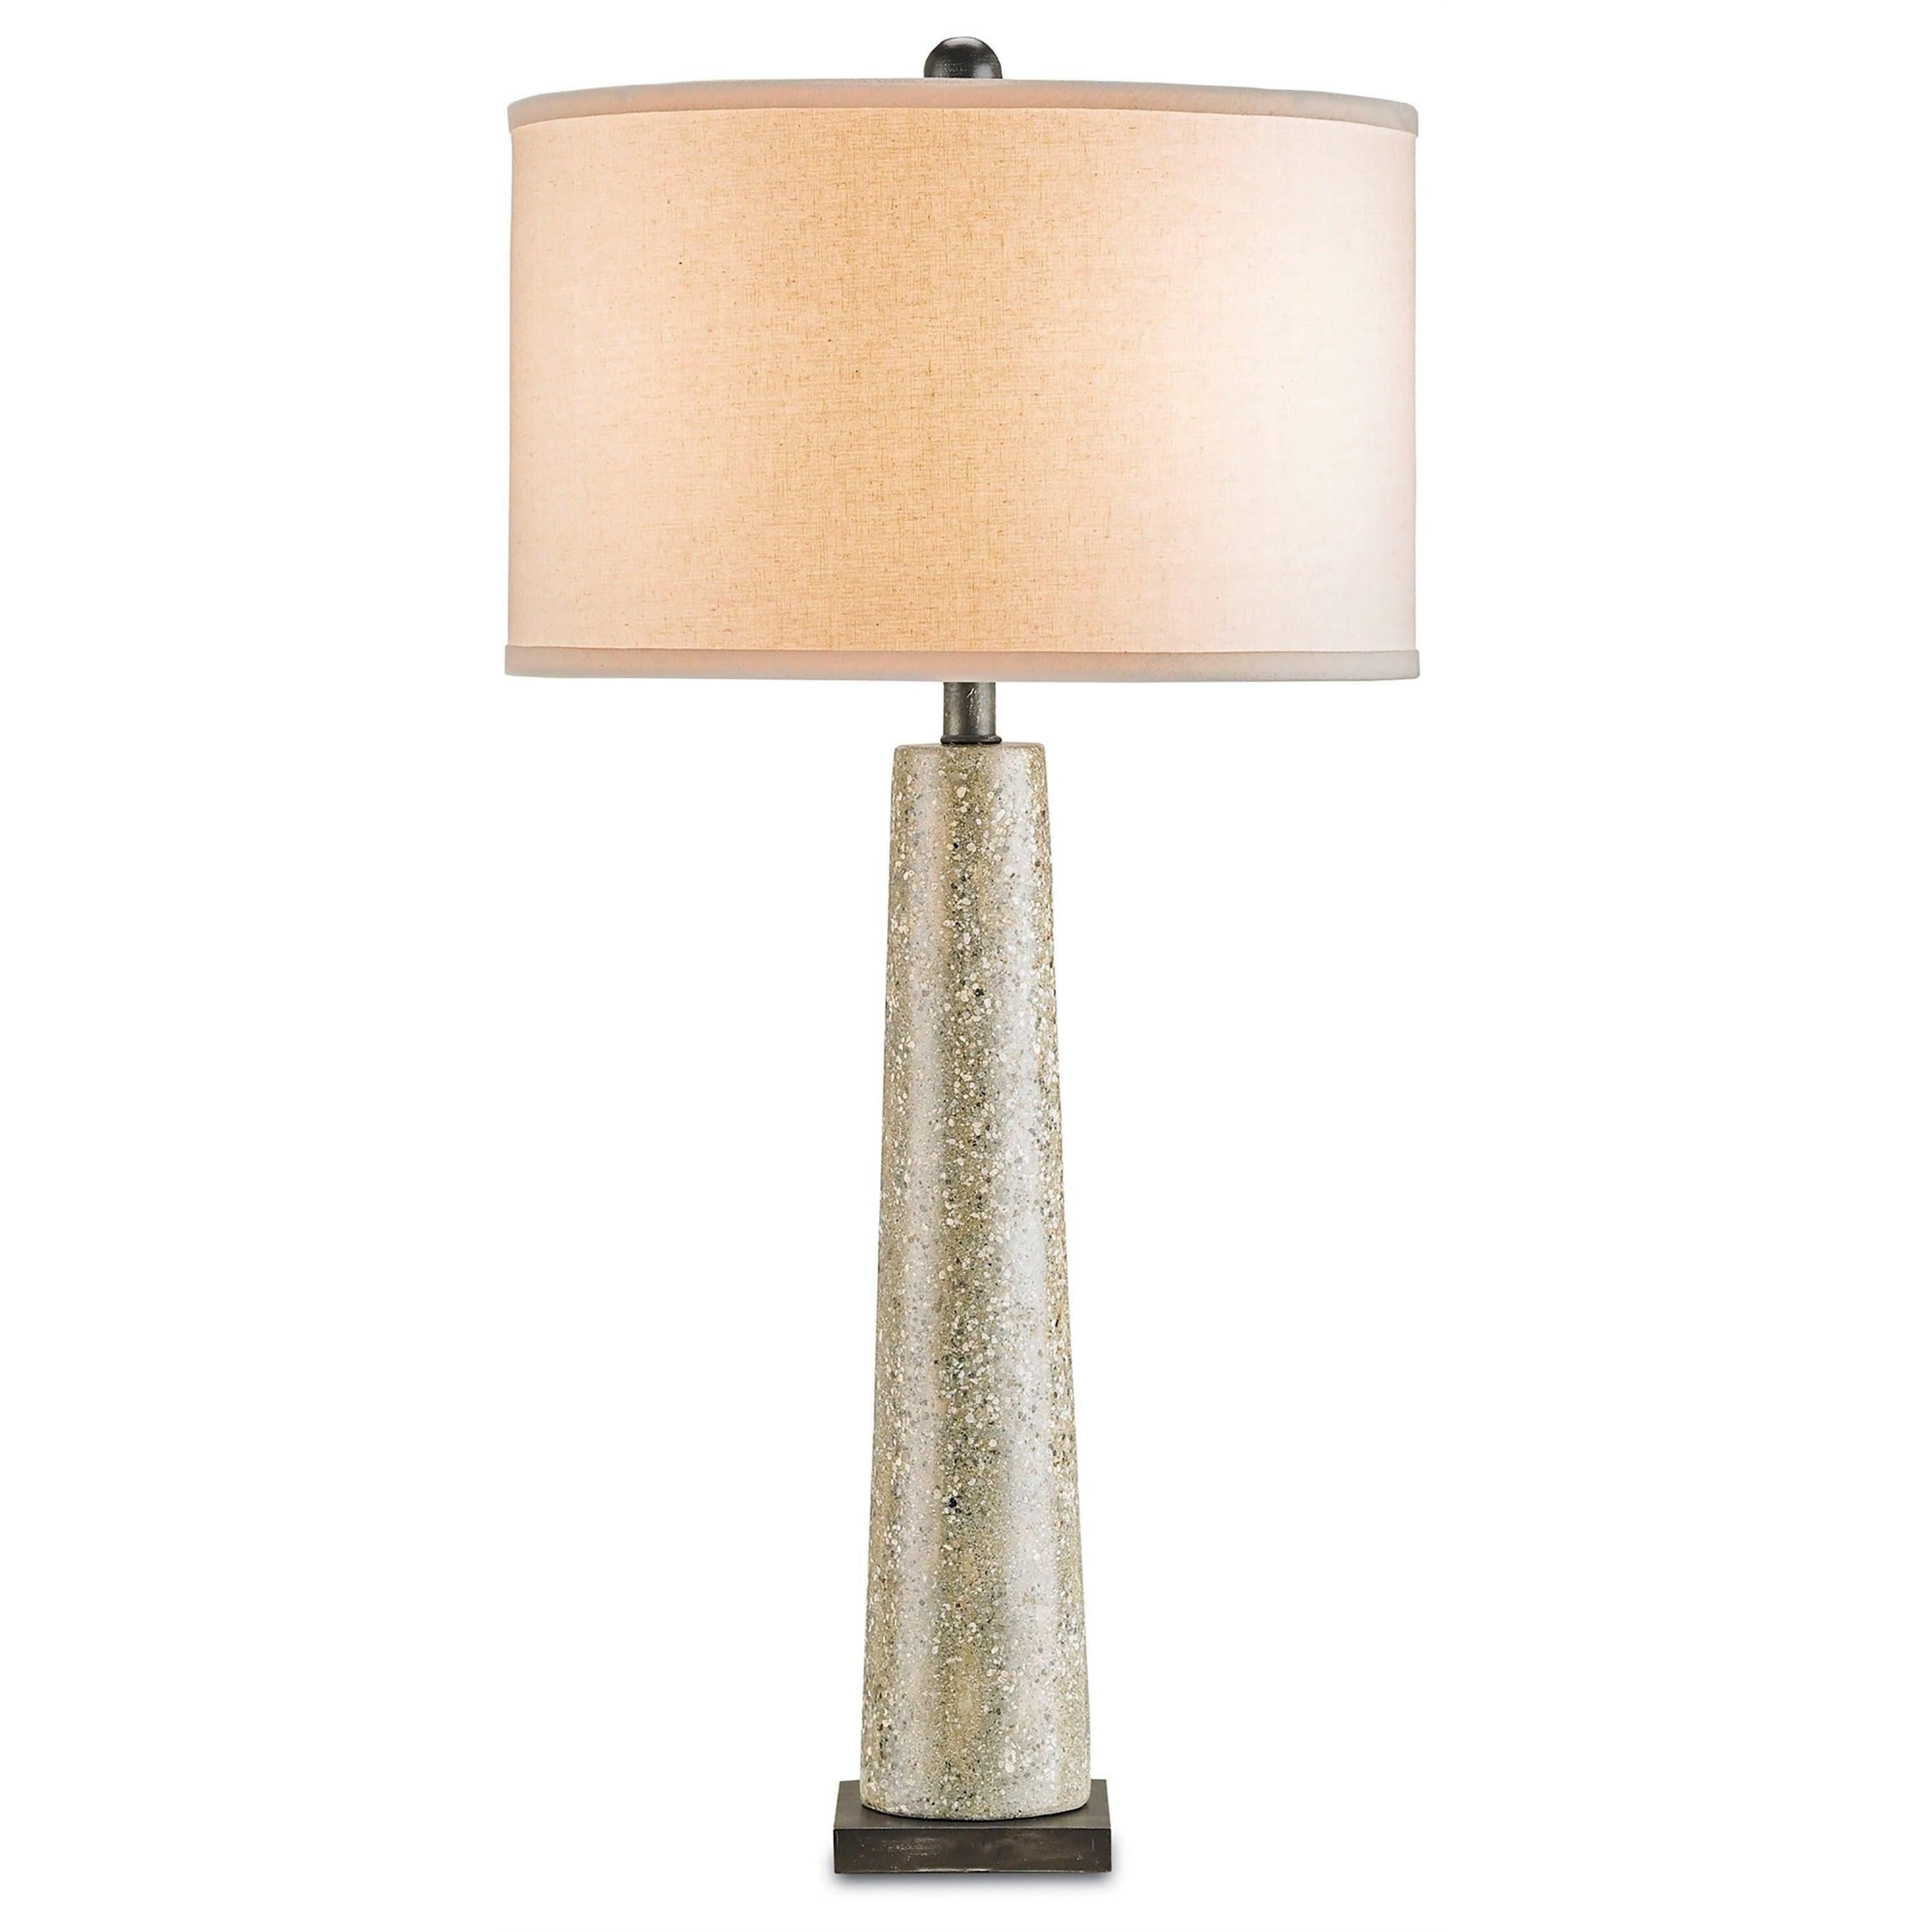 Currey and Company - Epigram Table Lamp - 6388 | Montreal Lighting & Hardware